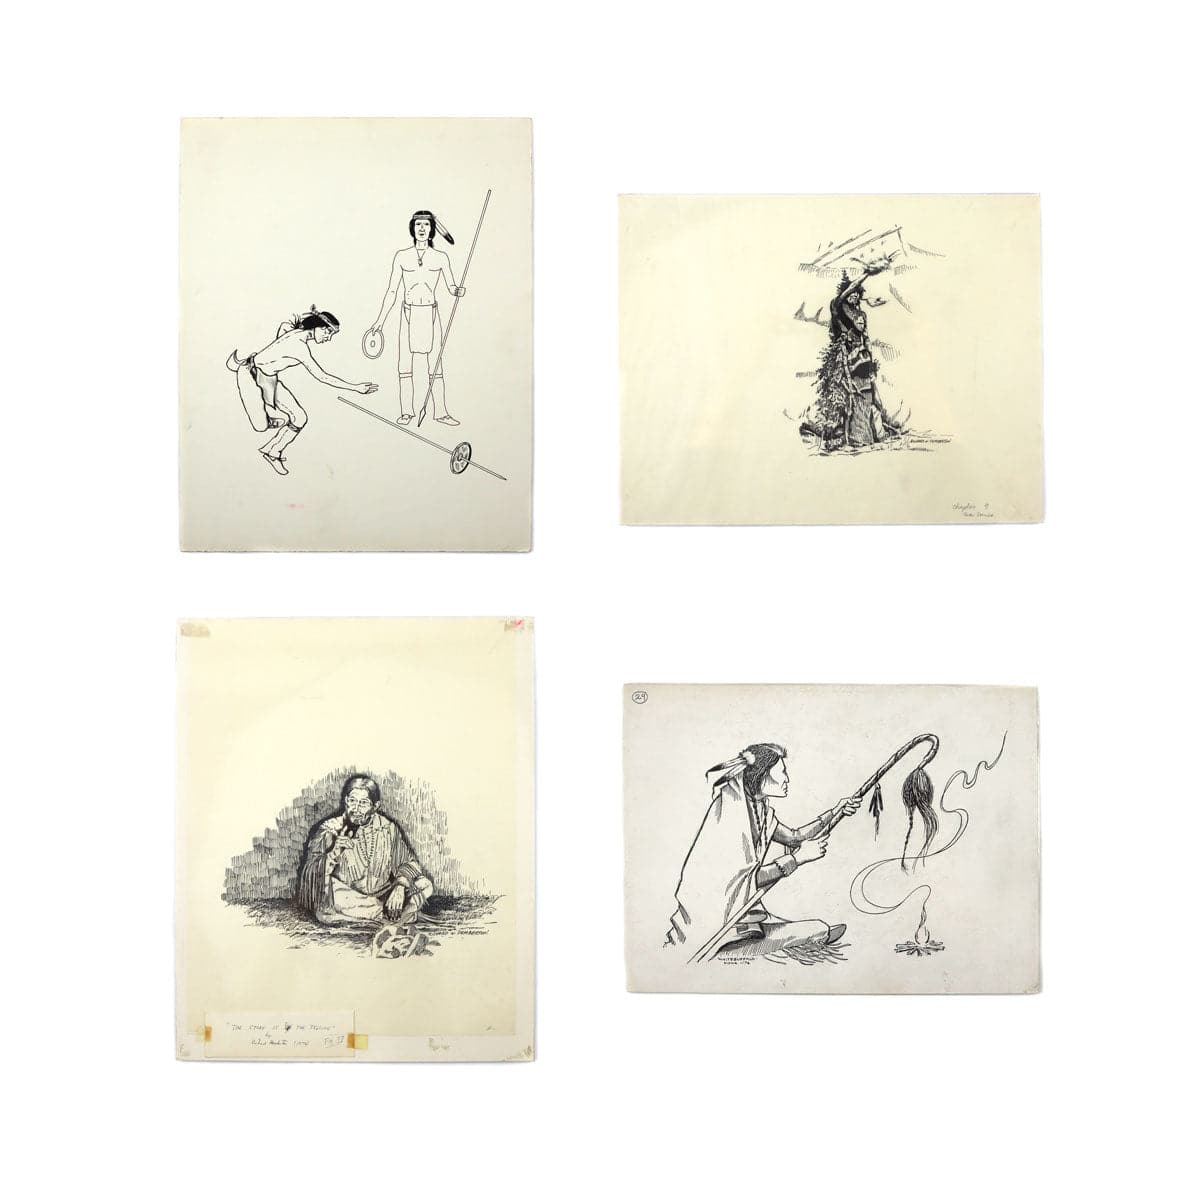 Group of 56 Original Kiowa Drawings, 120 Anko Calendar Drawings, and 13 Vinyl Records of Songs Arranged and Sung by Various Singers of the Southern and Northern Plains Tribes (M90218C-0621-001)15